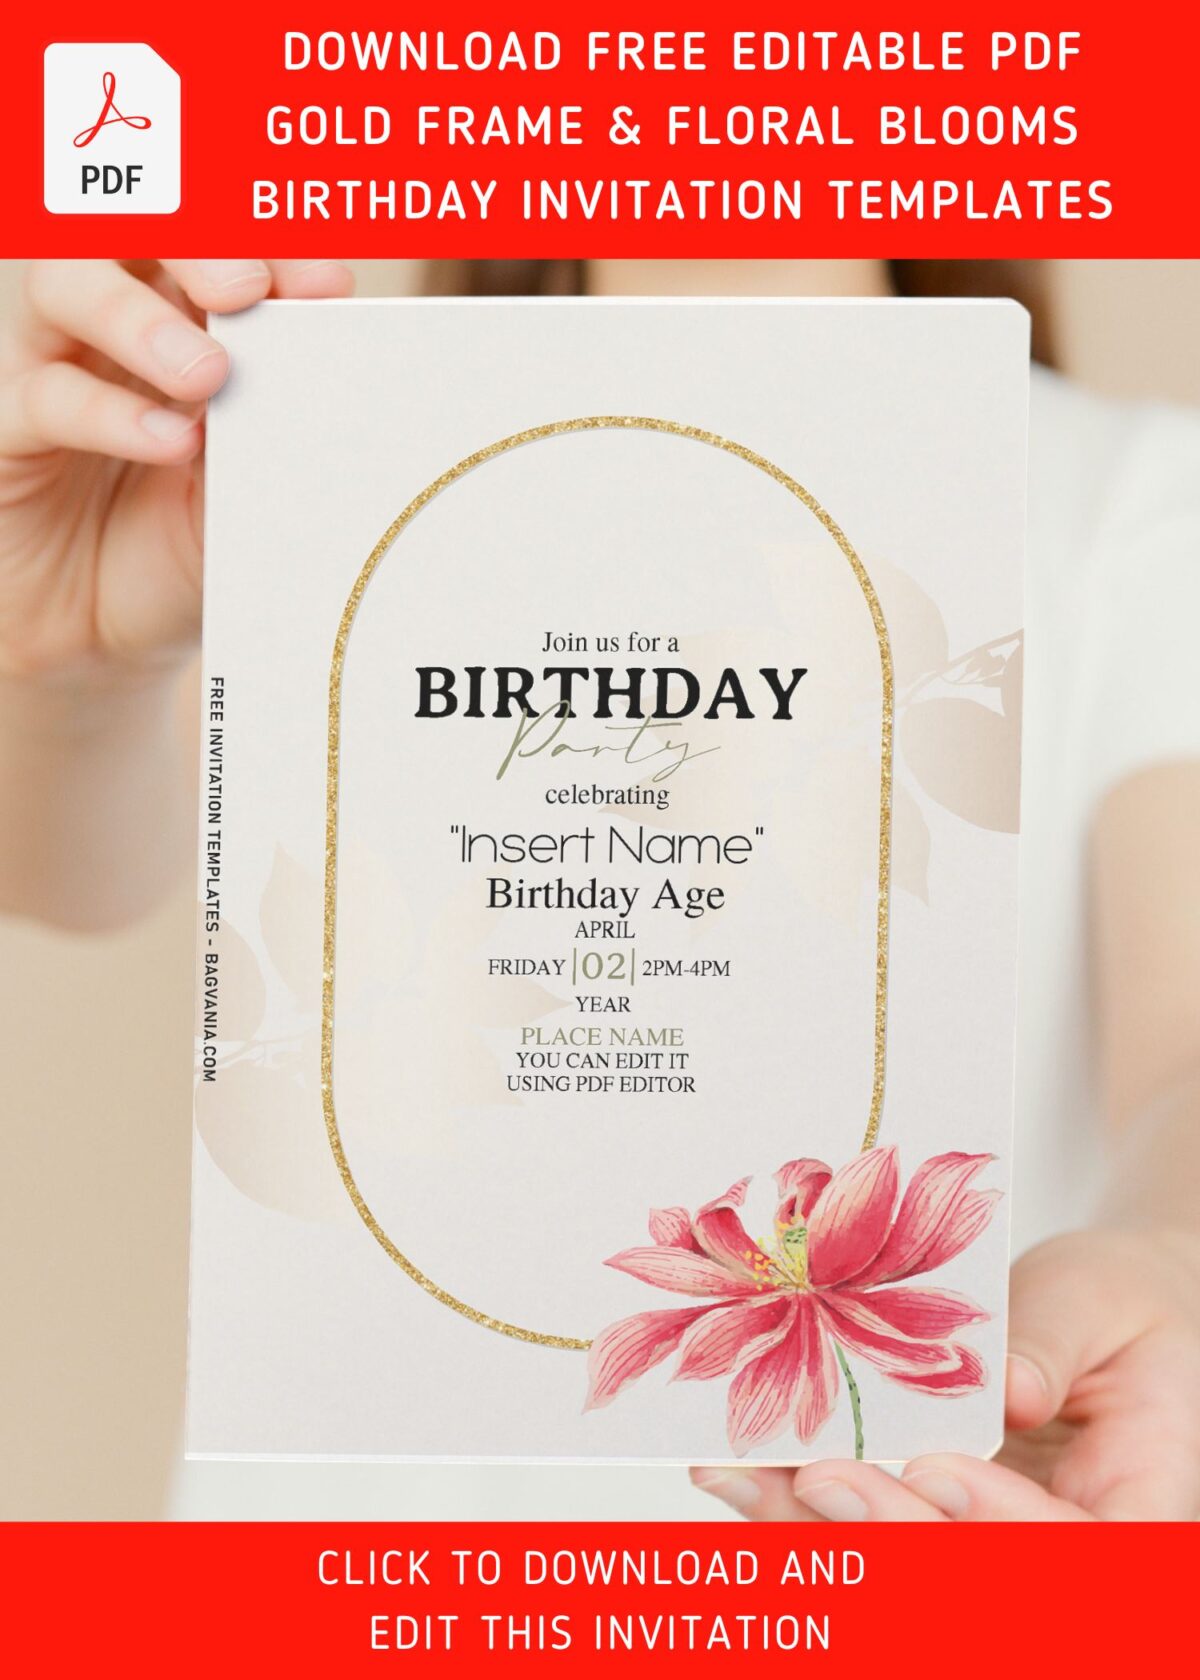 (Free Editable PDF) Gold Frame And Floral Blooms Invitation Templates with editable text